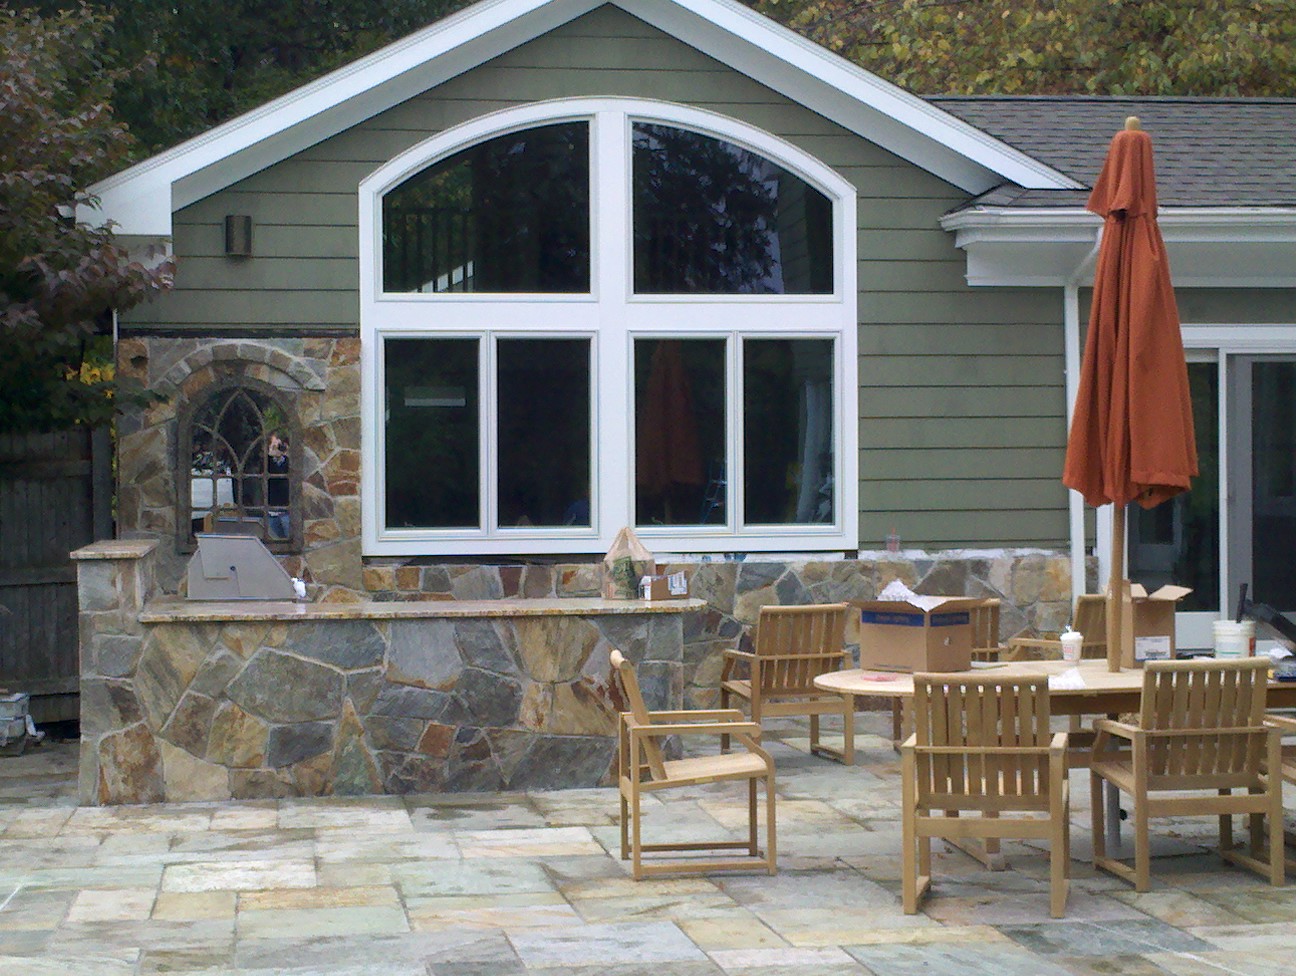 Outdoor living expansion off this newly expanded westport residence is